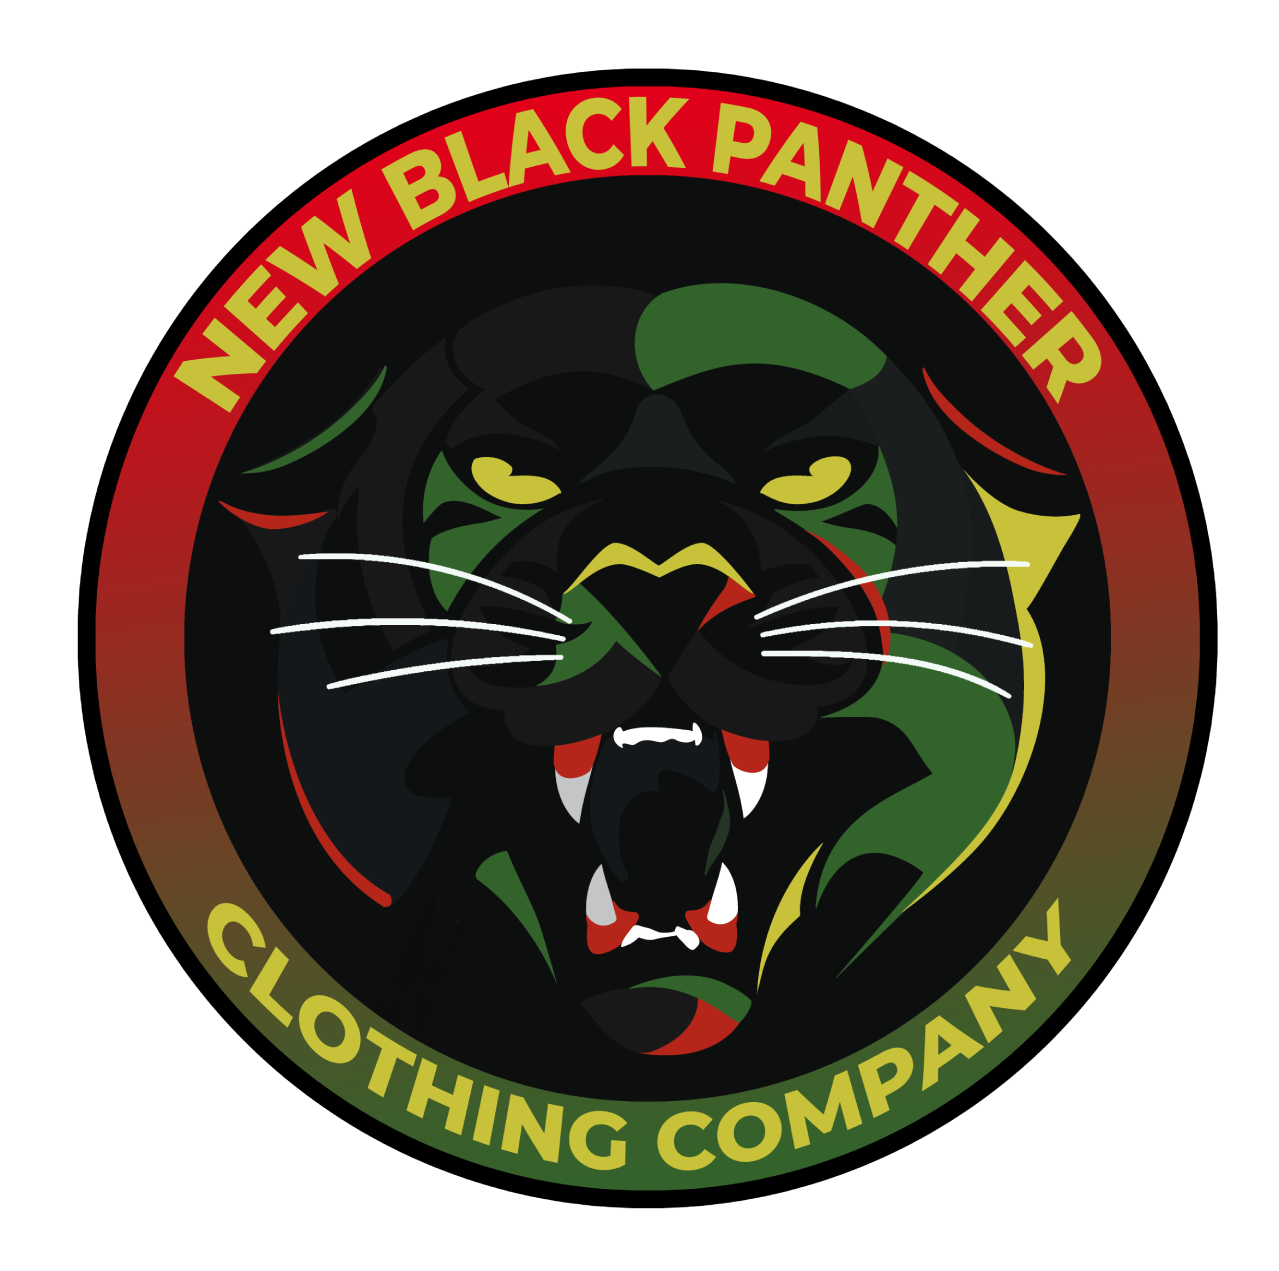 New Black Panther Clothing